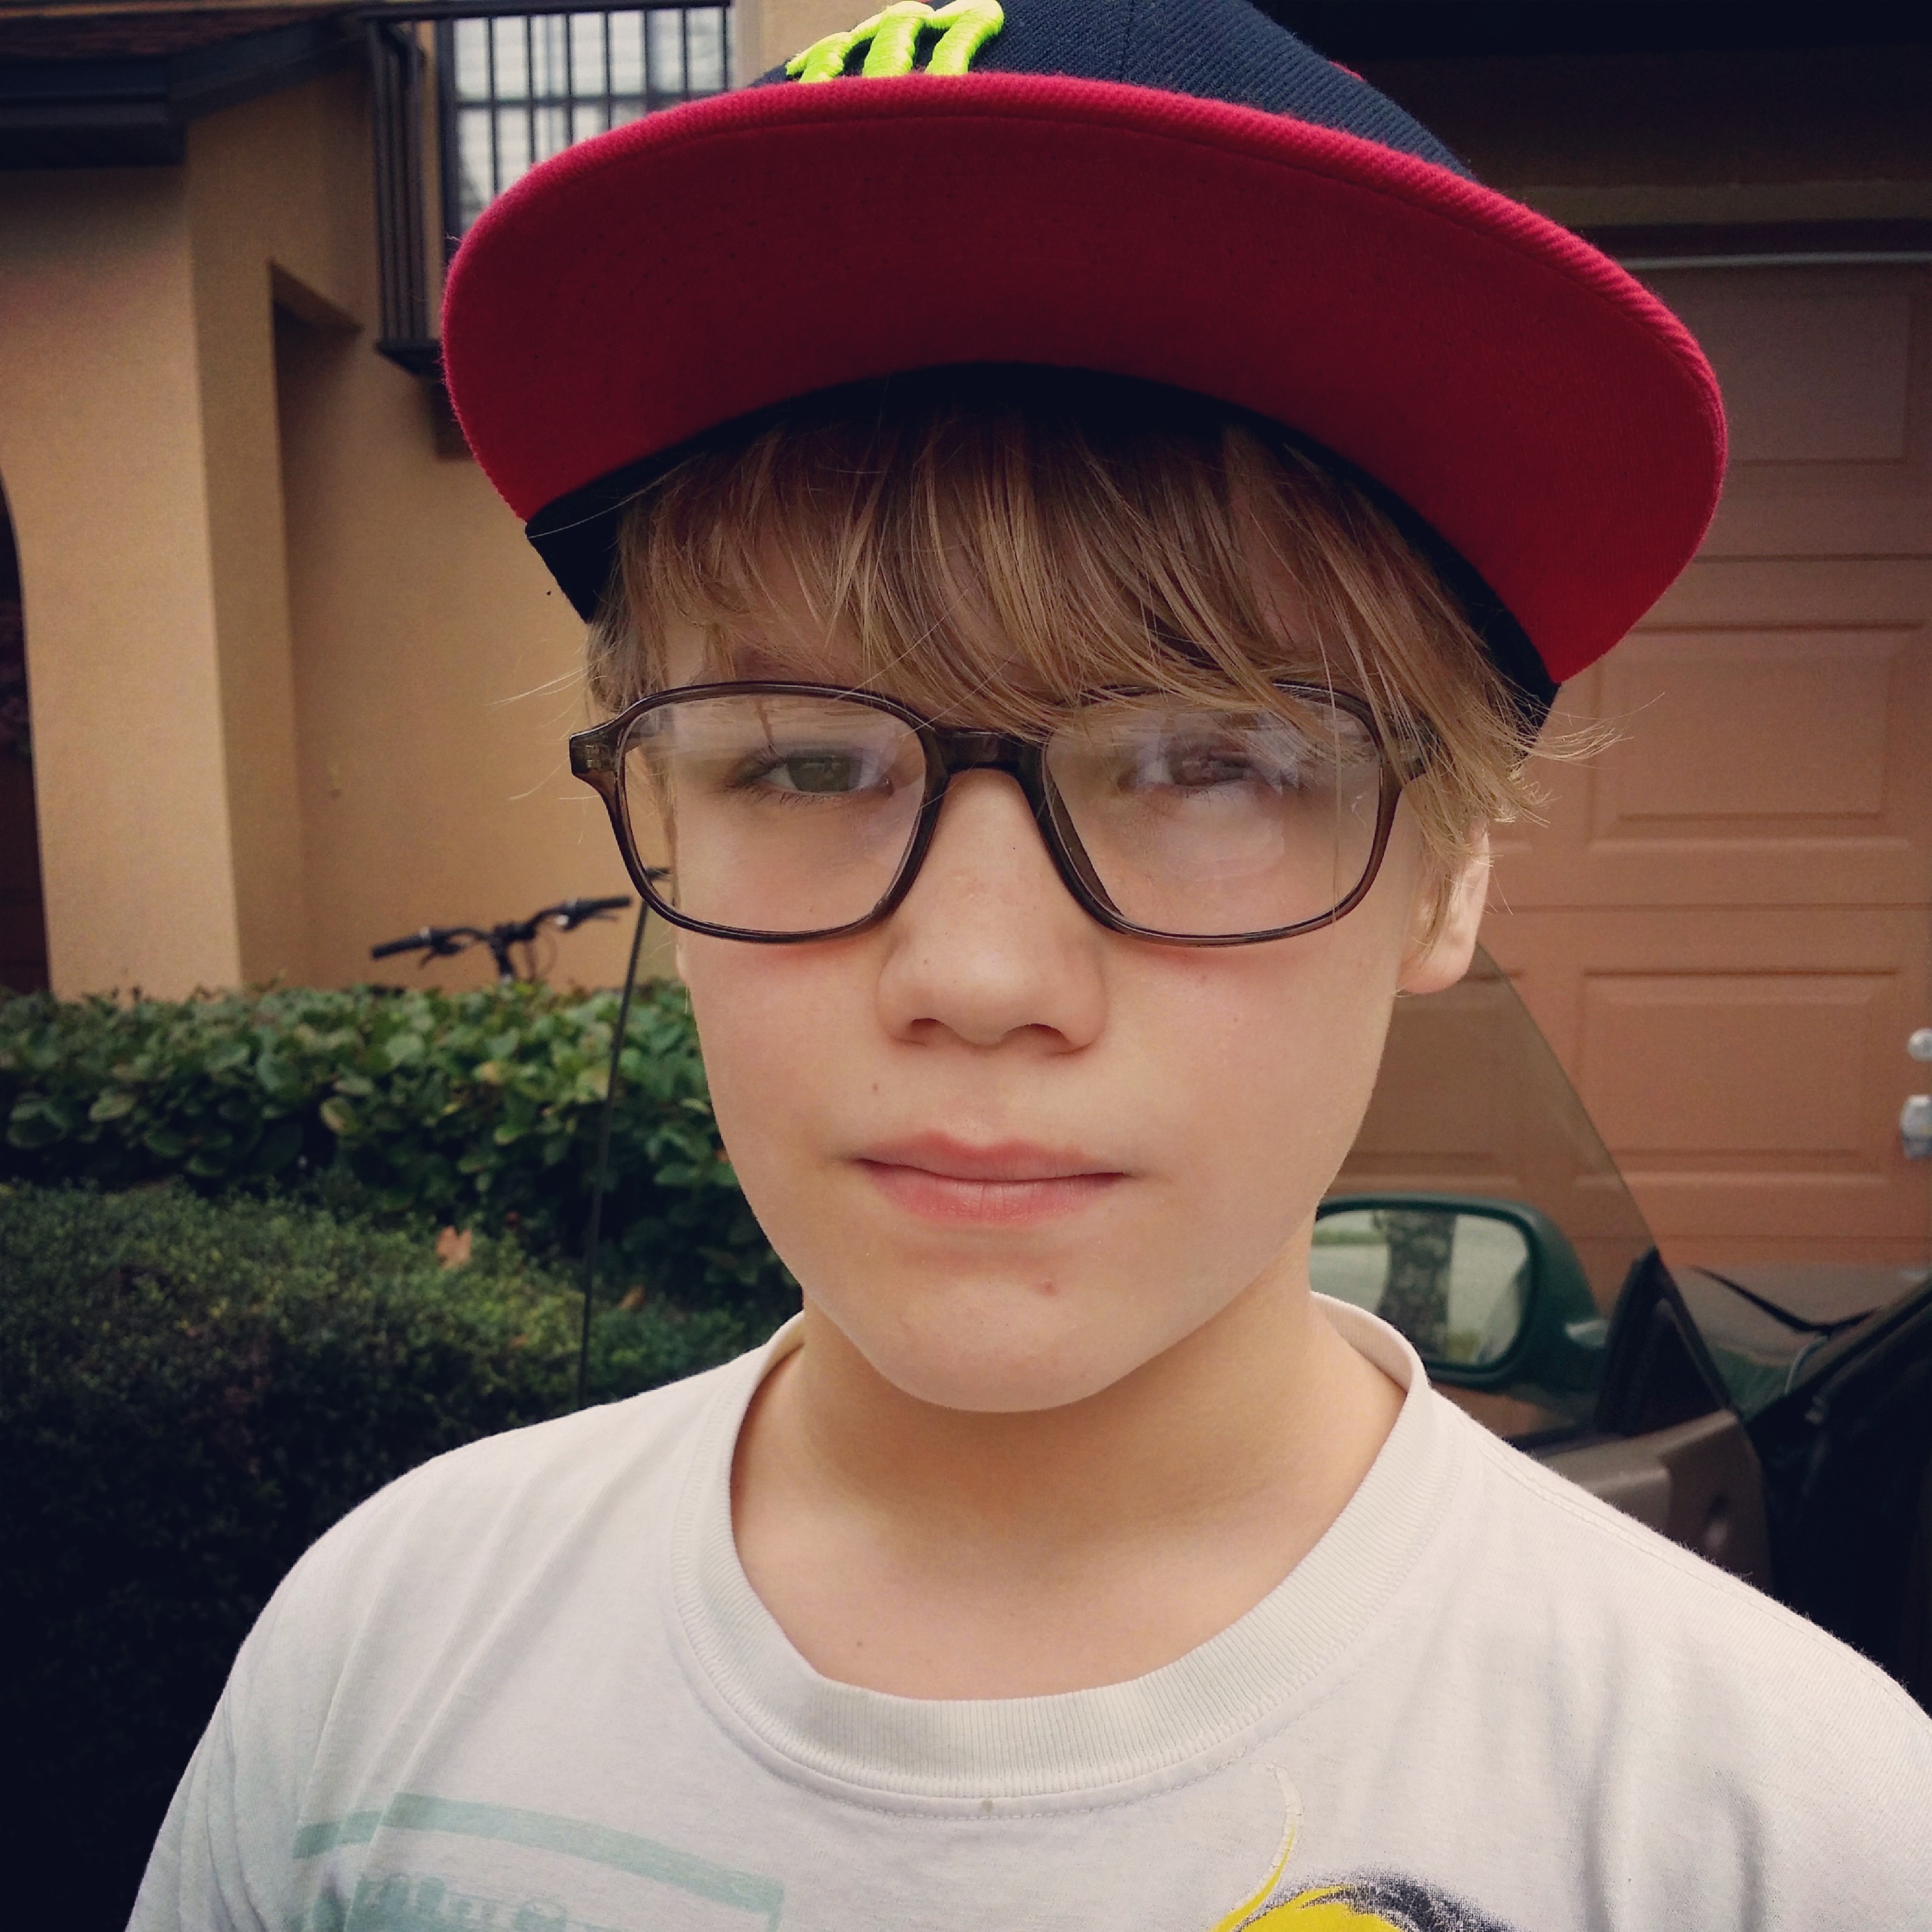 Tristans new glasses. His favorite pair havent yet arrived.